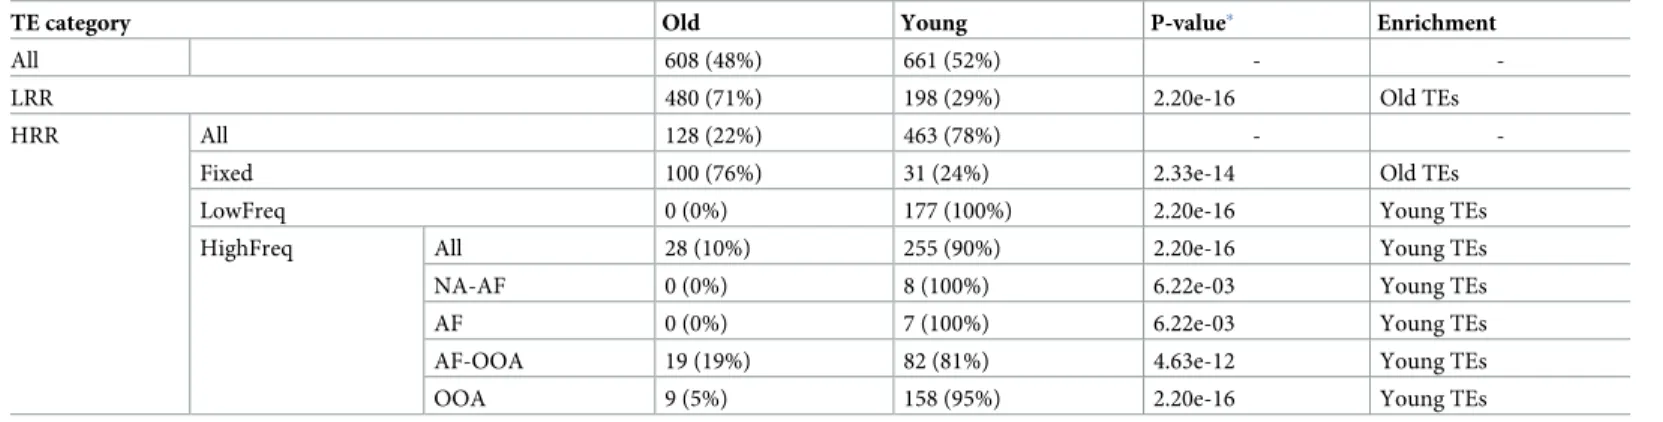 Table 1. Age distribution of TEs belonging to the different population frequency categories.